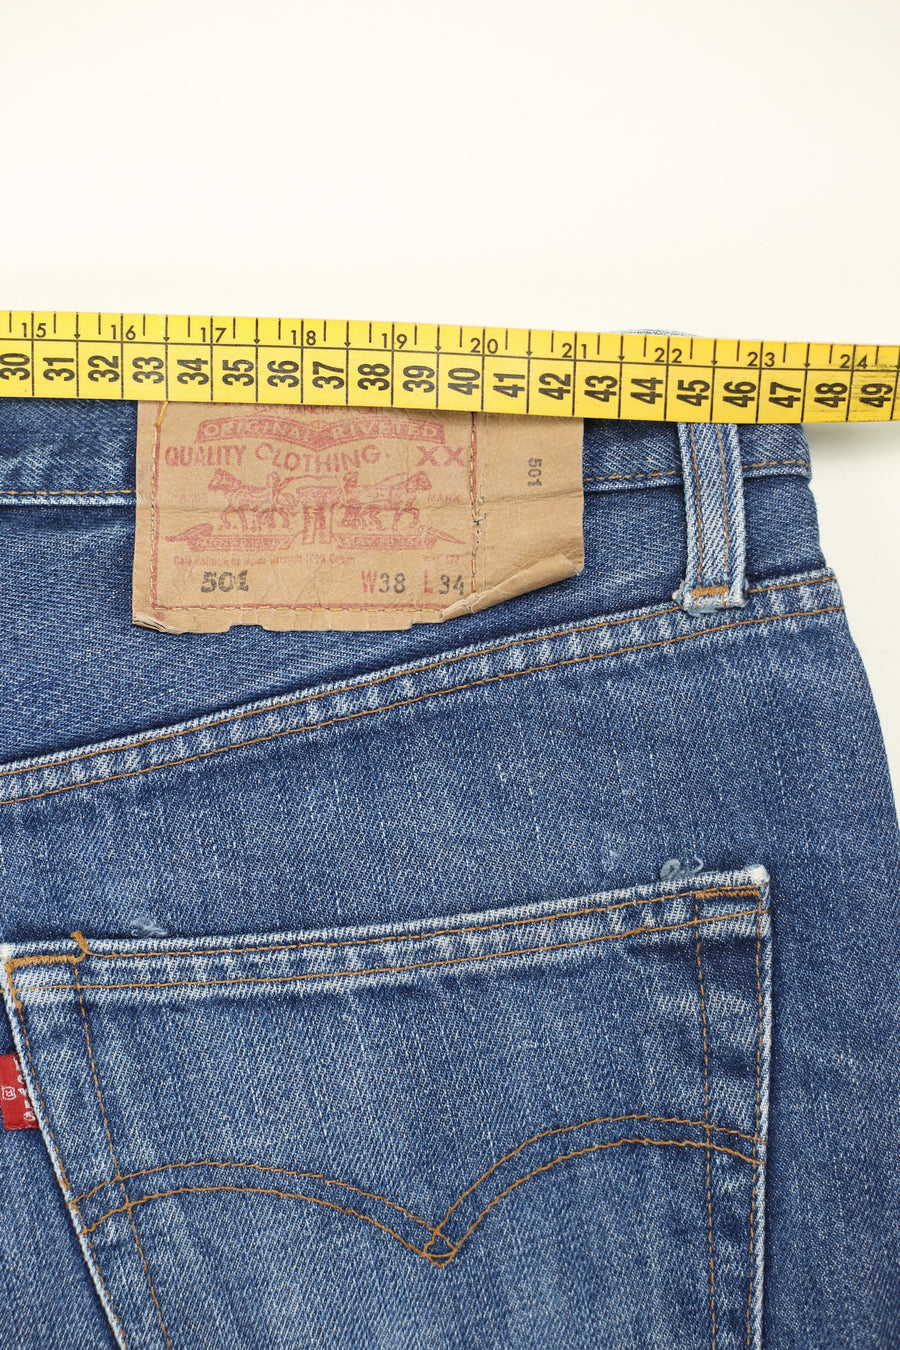 Levis 501 MADE IN USA - W38 L29  -